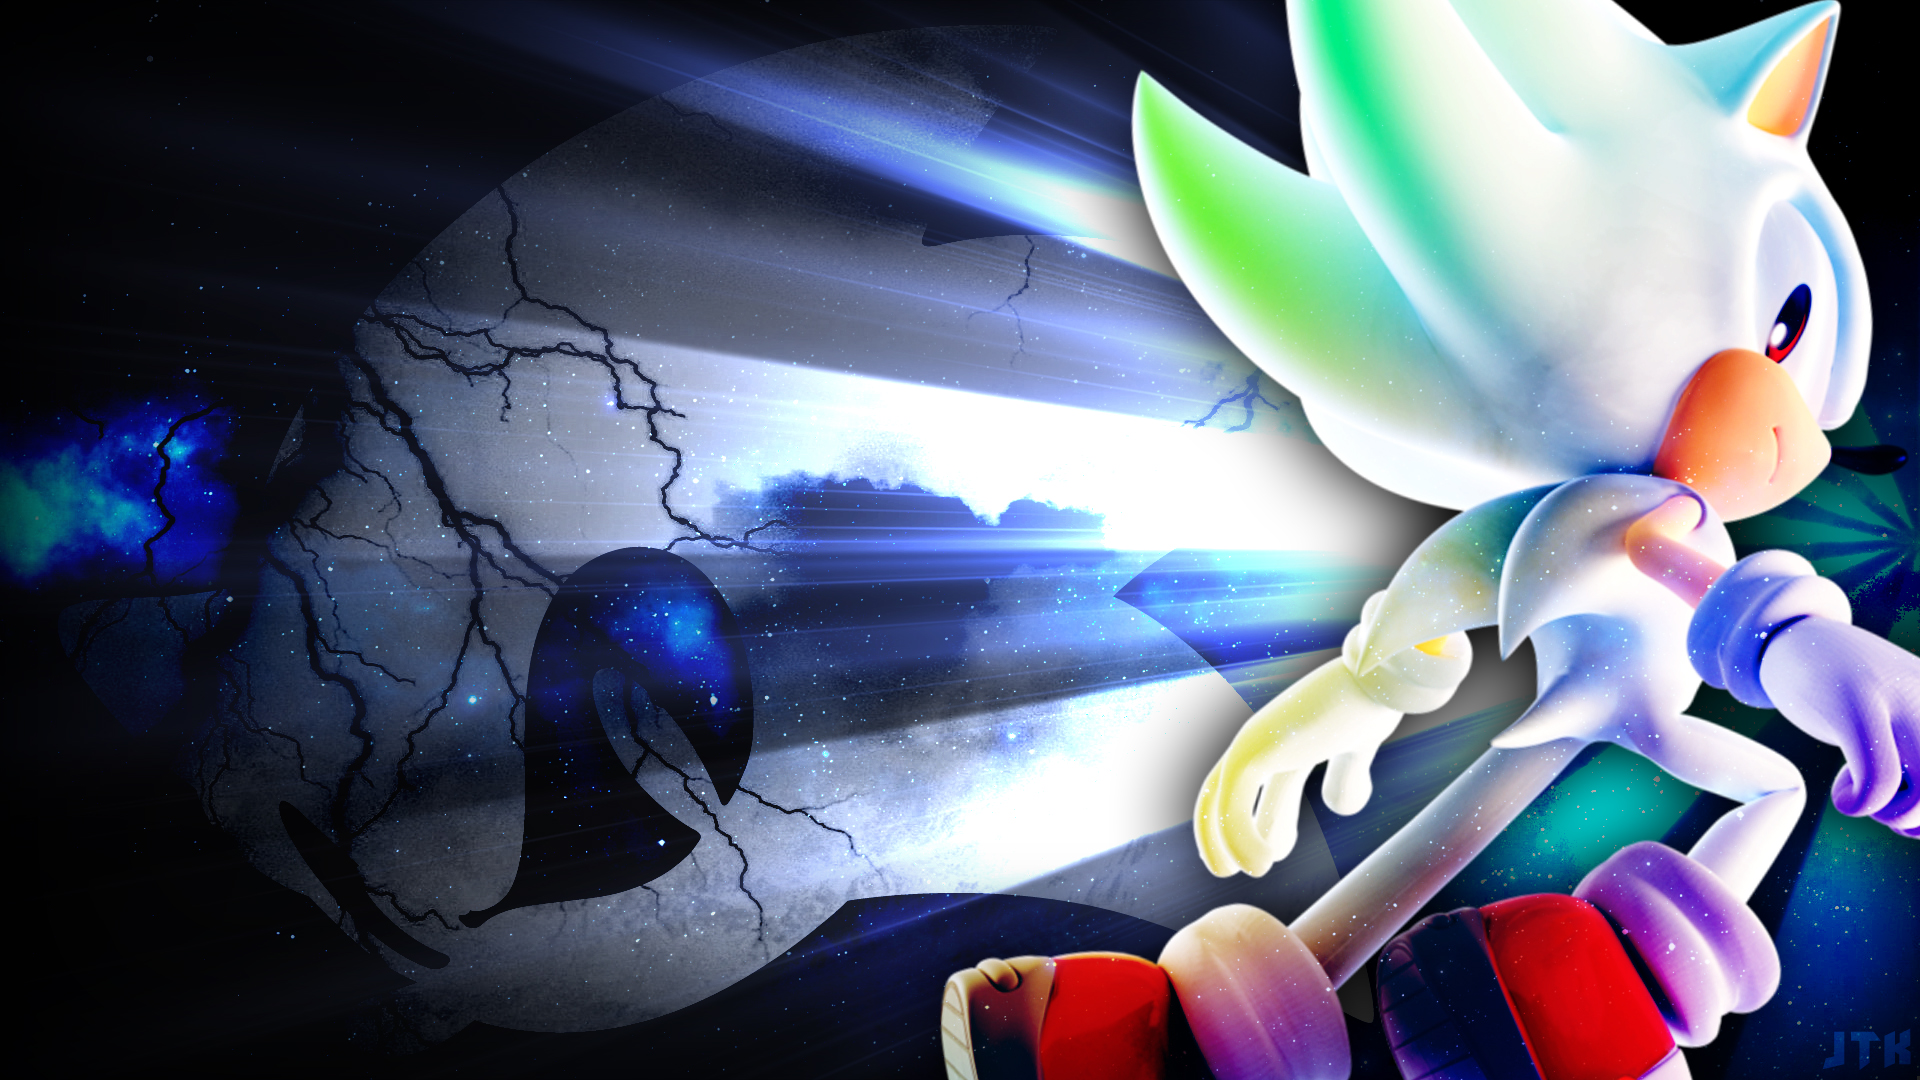 Sonic Colors Wallpapers  Wallpaper Cave